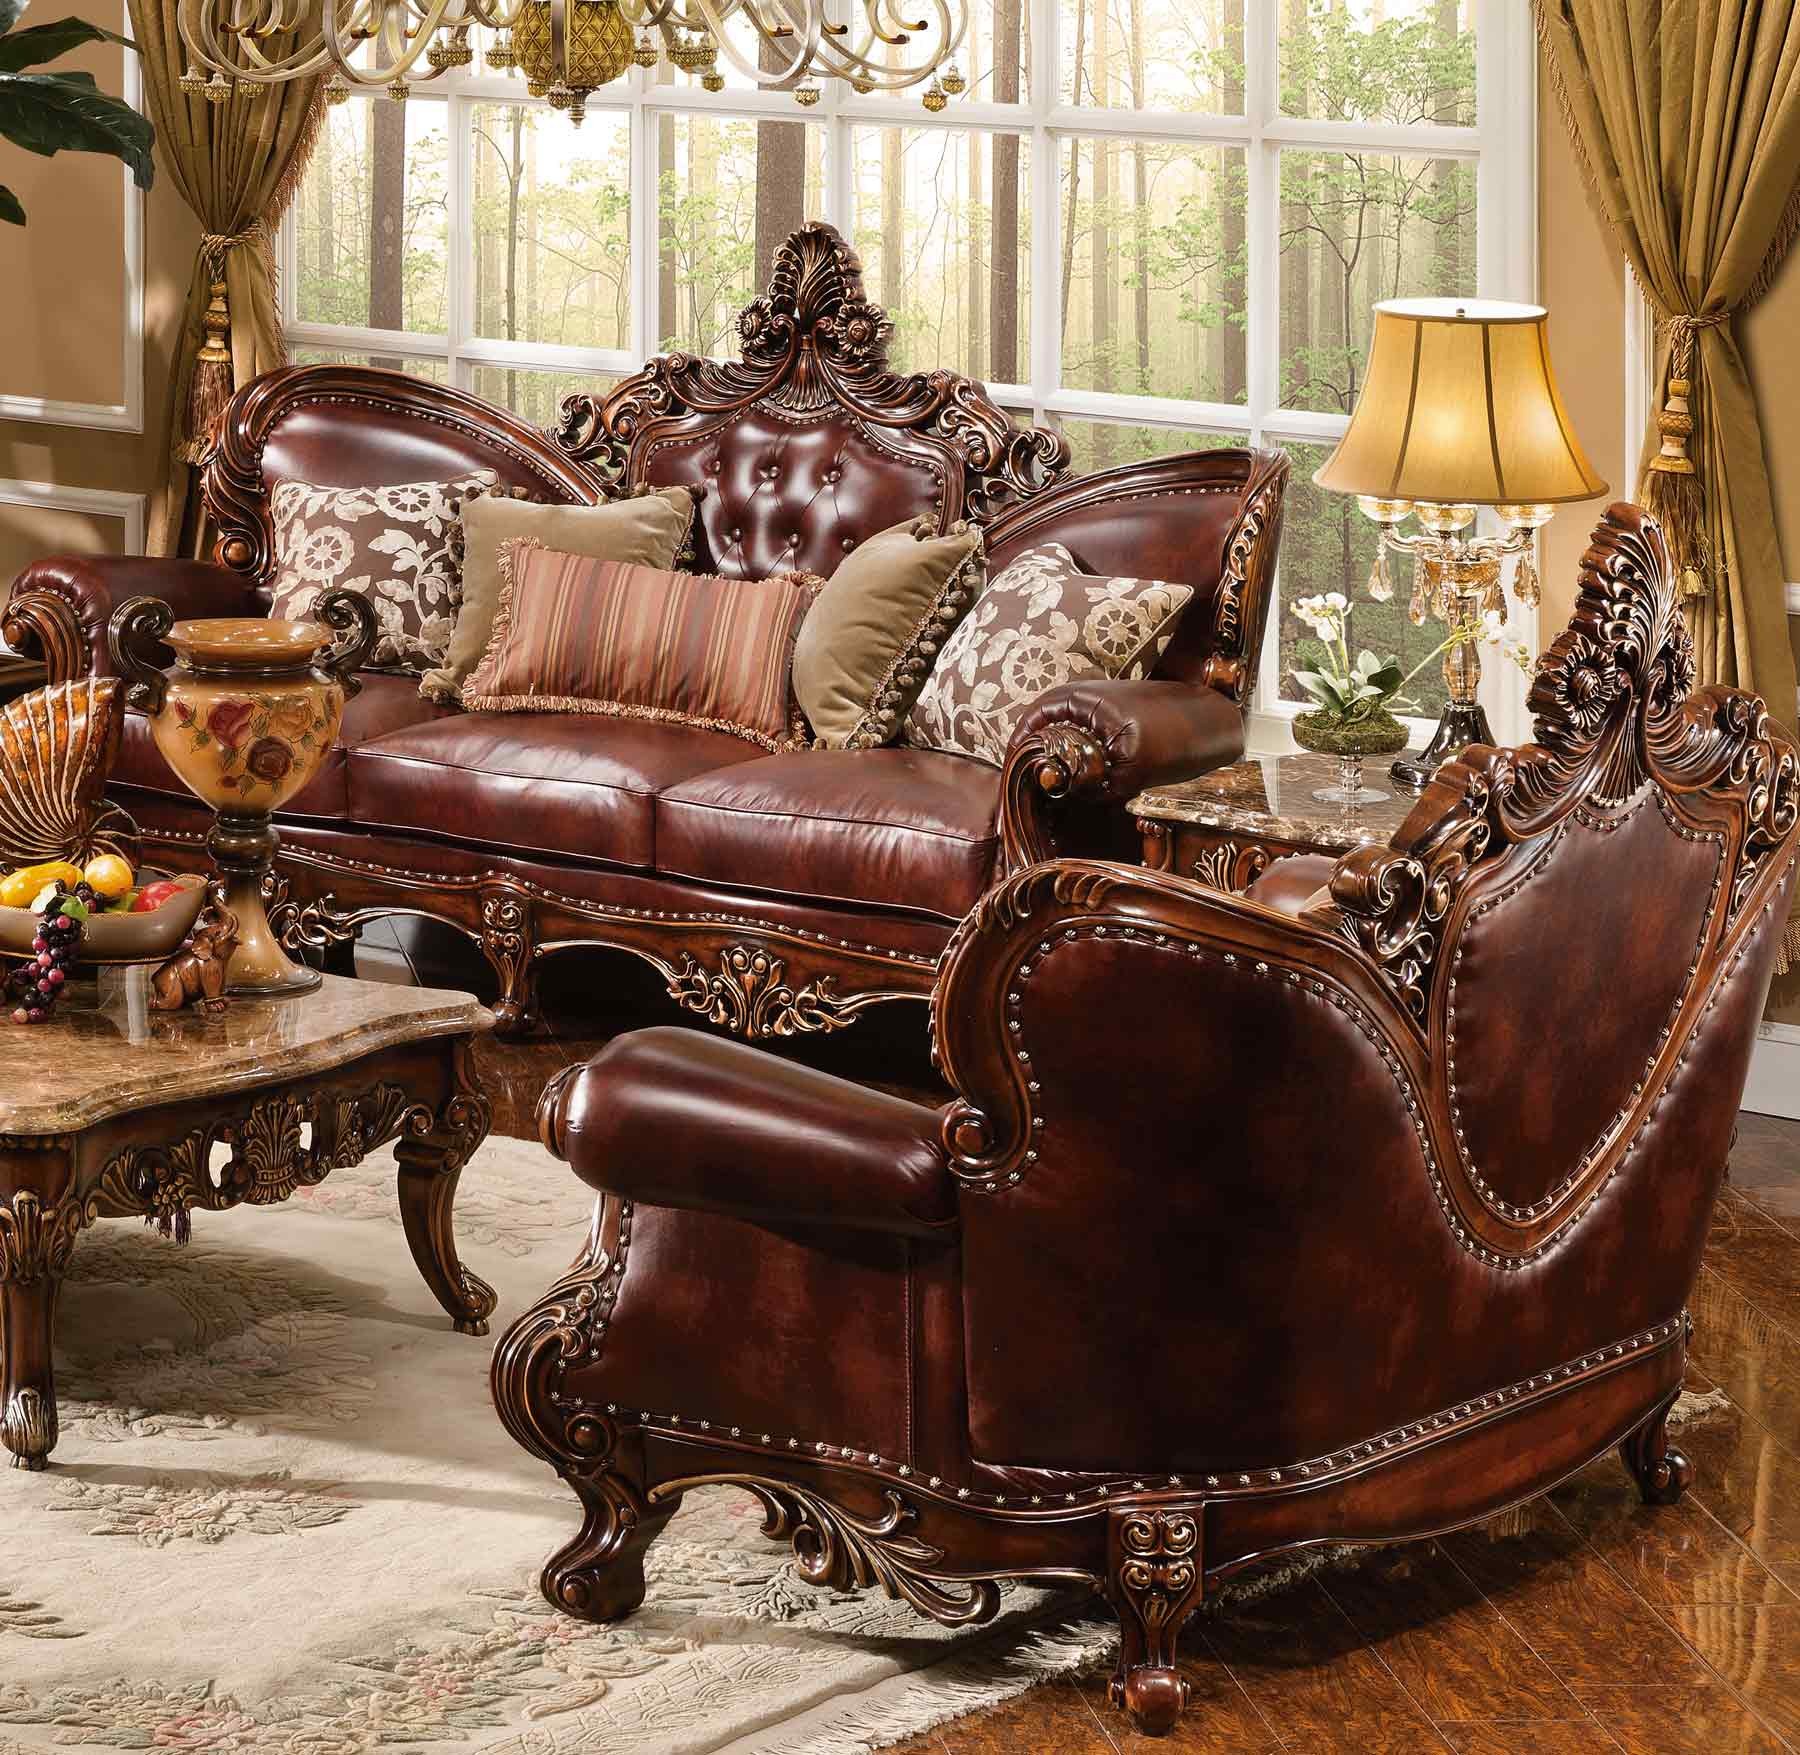 Alexia Loveseat / 3-Seater Sofa shown in Antique Cherry finish